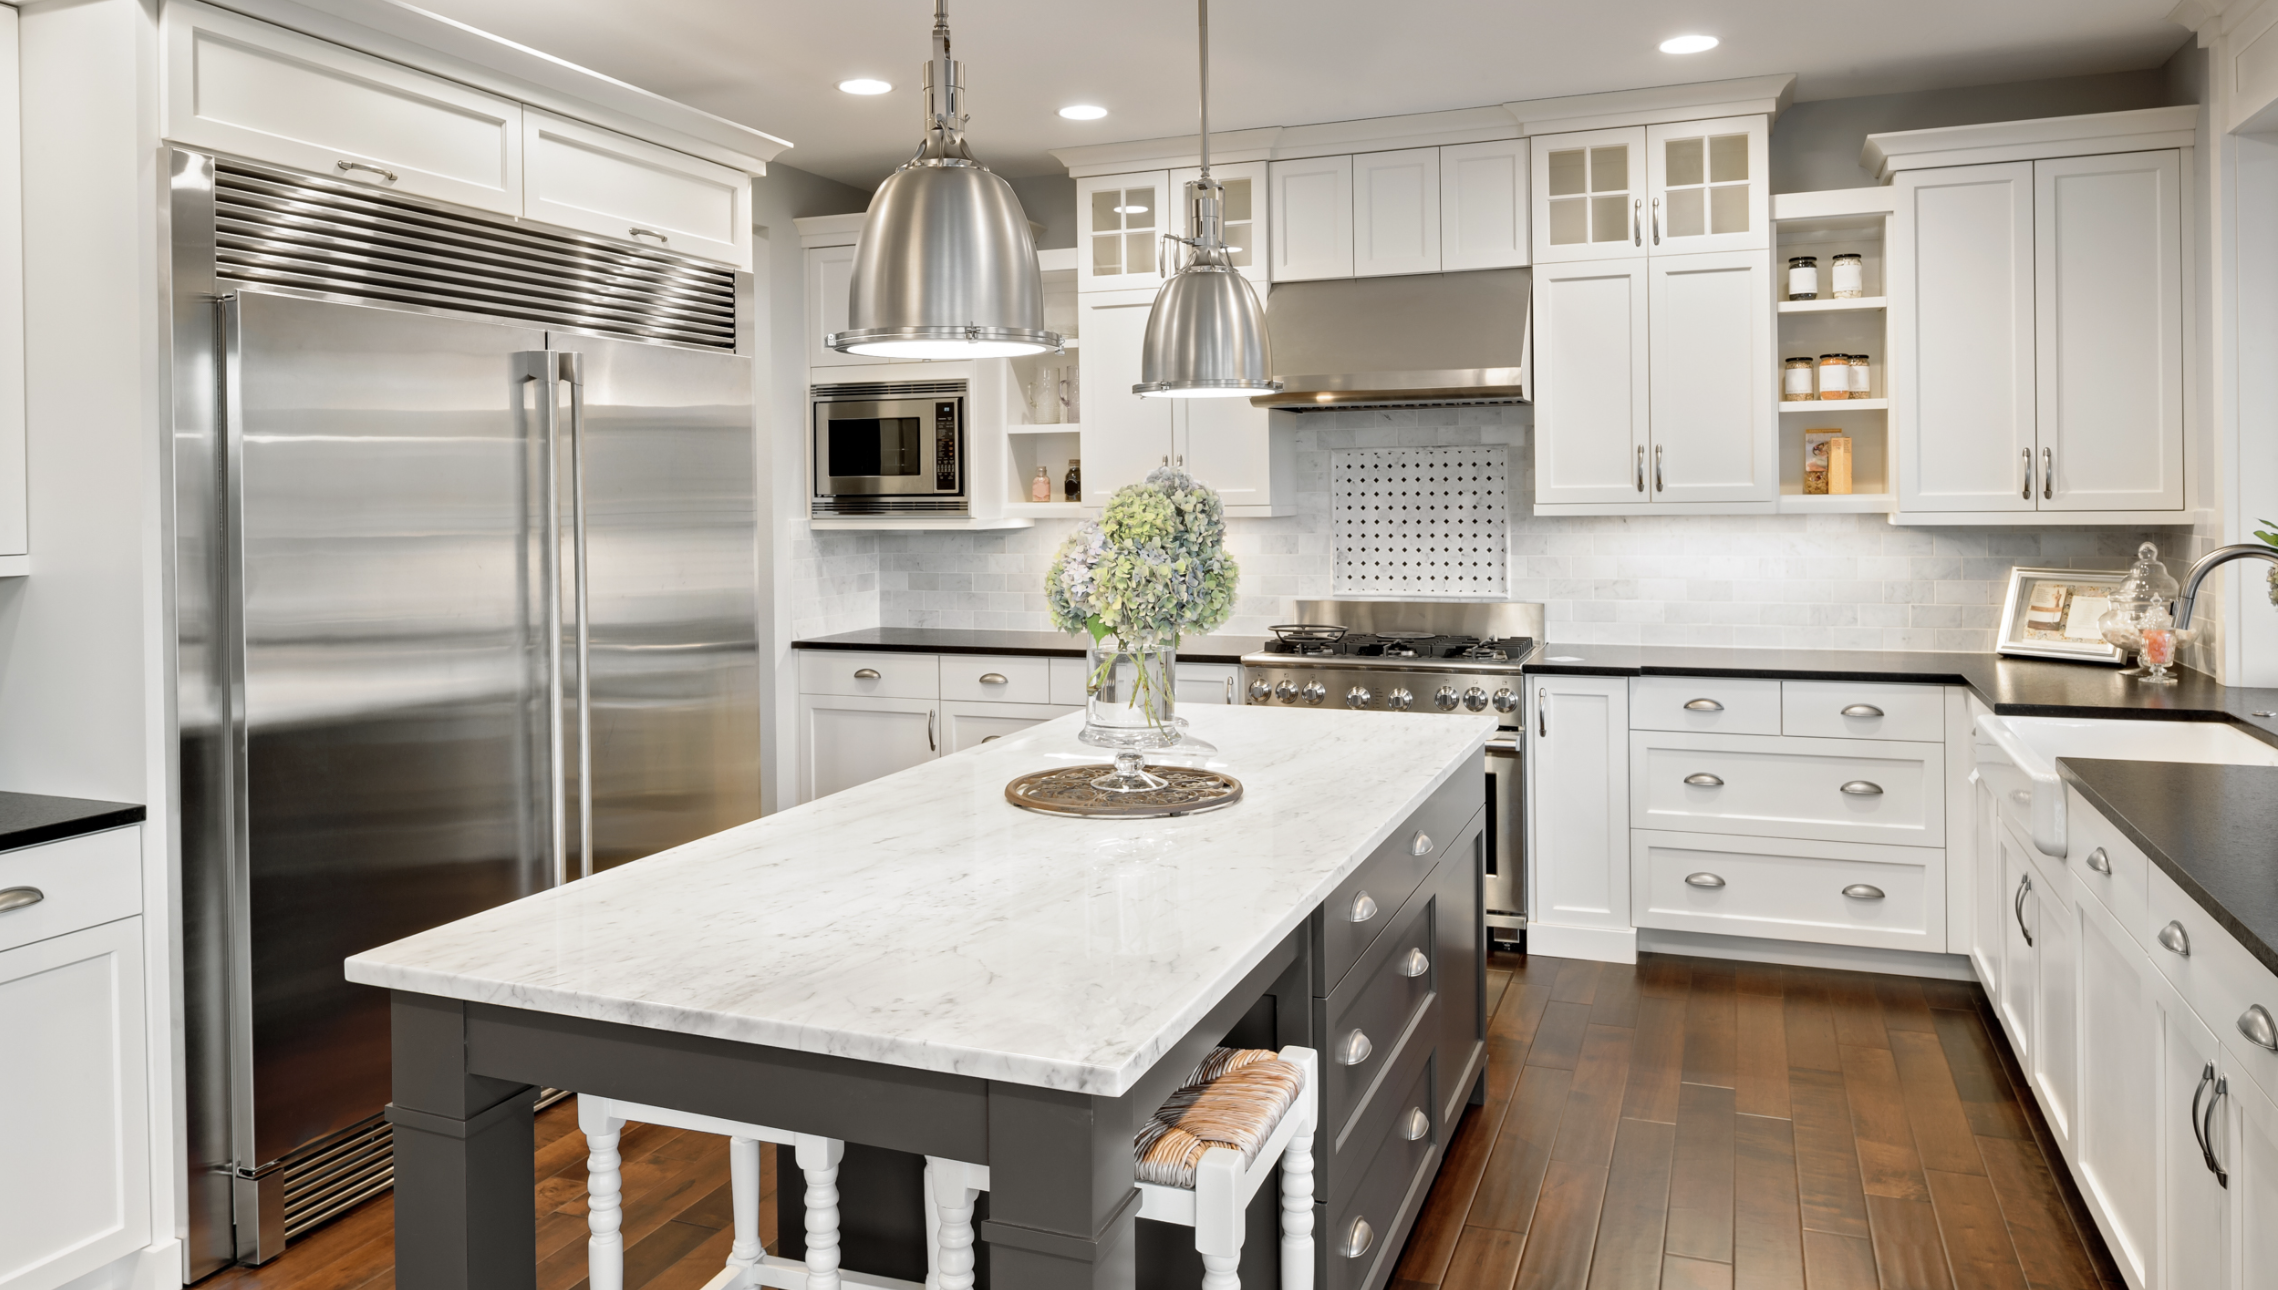 10 Questions To Help Get Started With a Kitchen Remodel